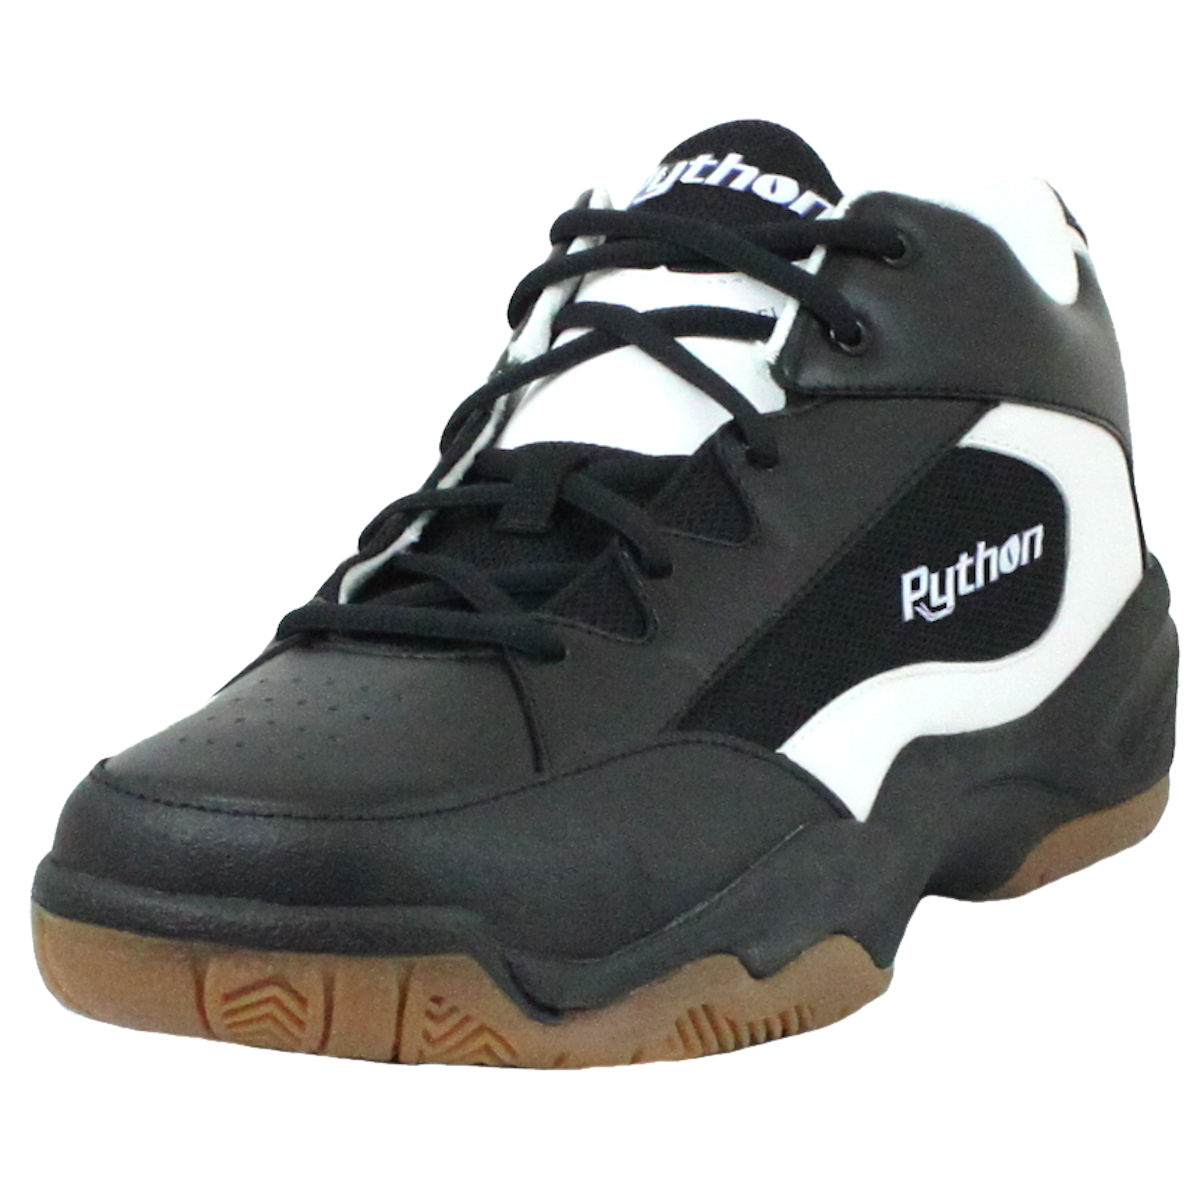 Python Wide (EE) Width Indoor Black Mid Size Racquetball (Squash, Badminton, Volleyball) Shoe - image 2 of 6